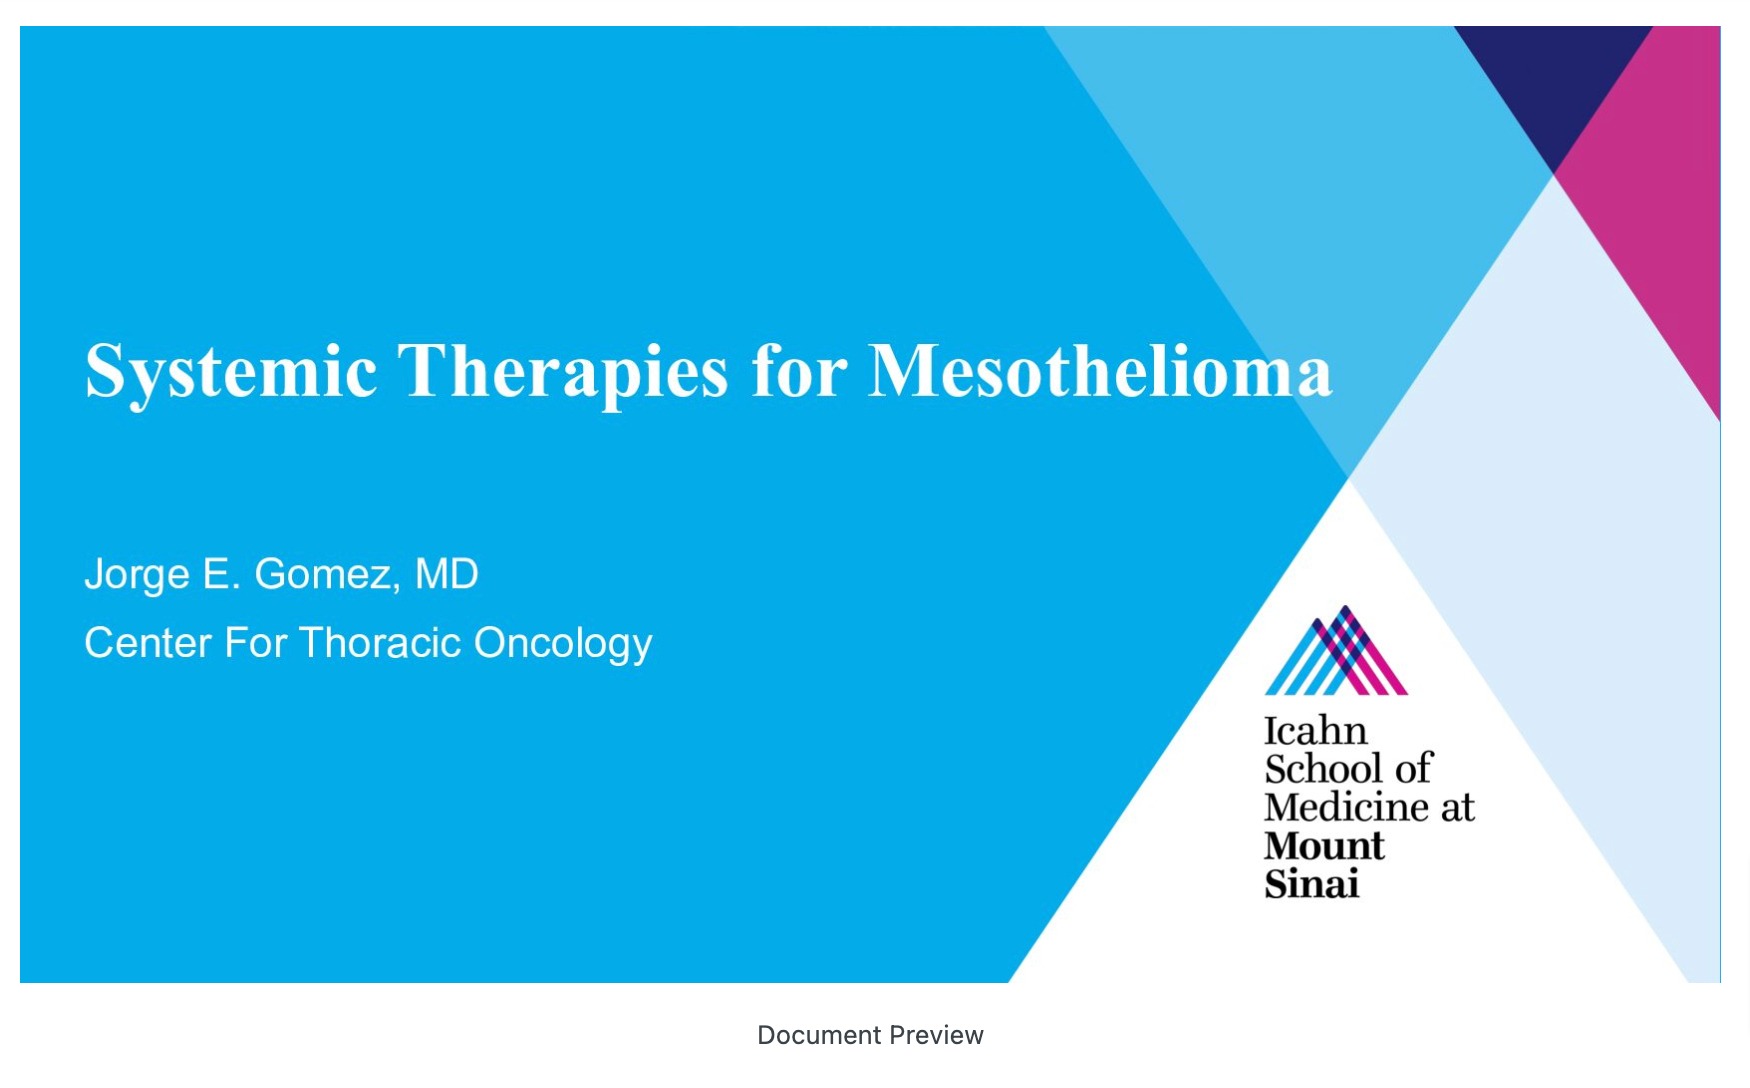 Systemic Therapies for Mesothelioma